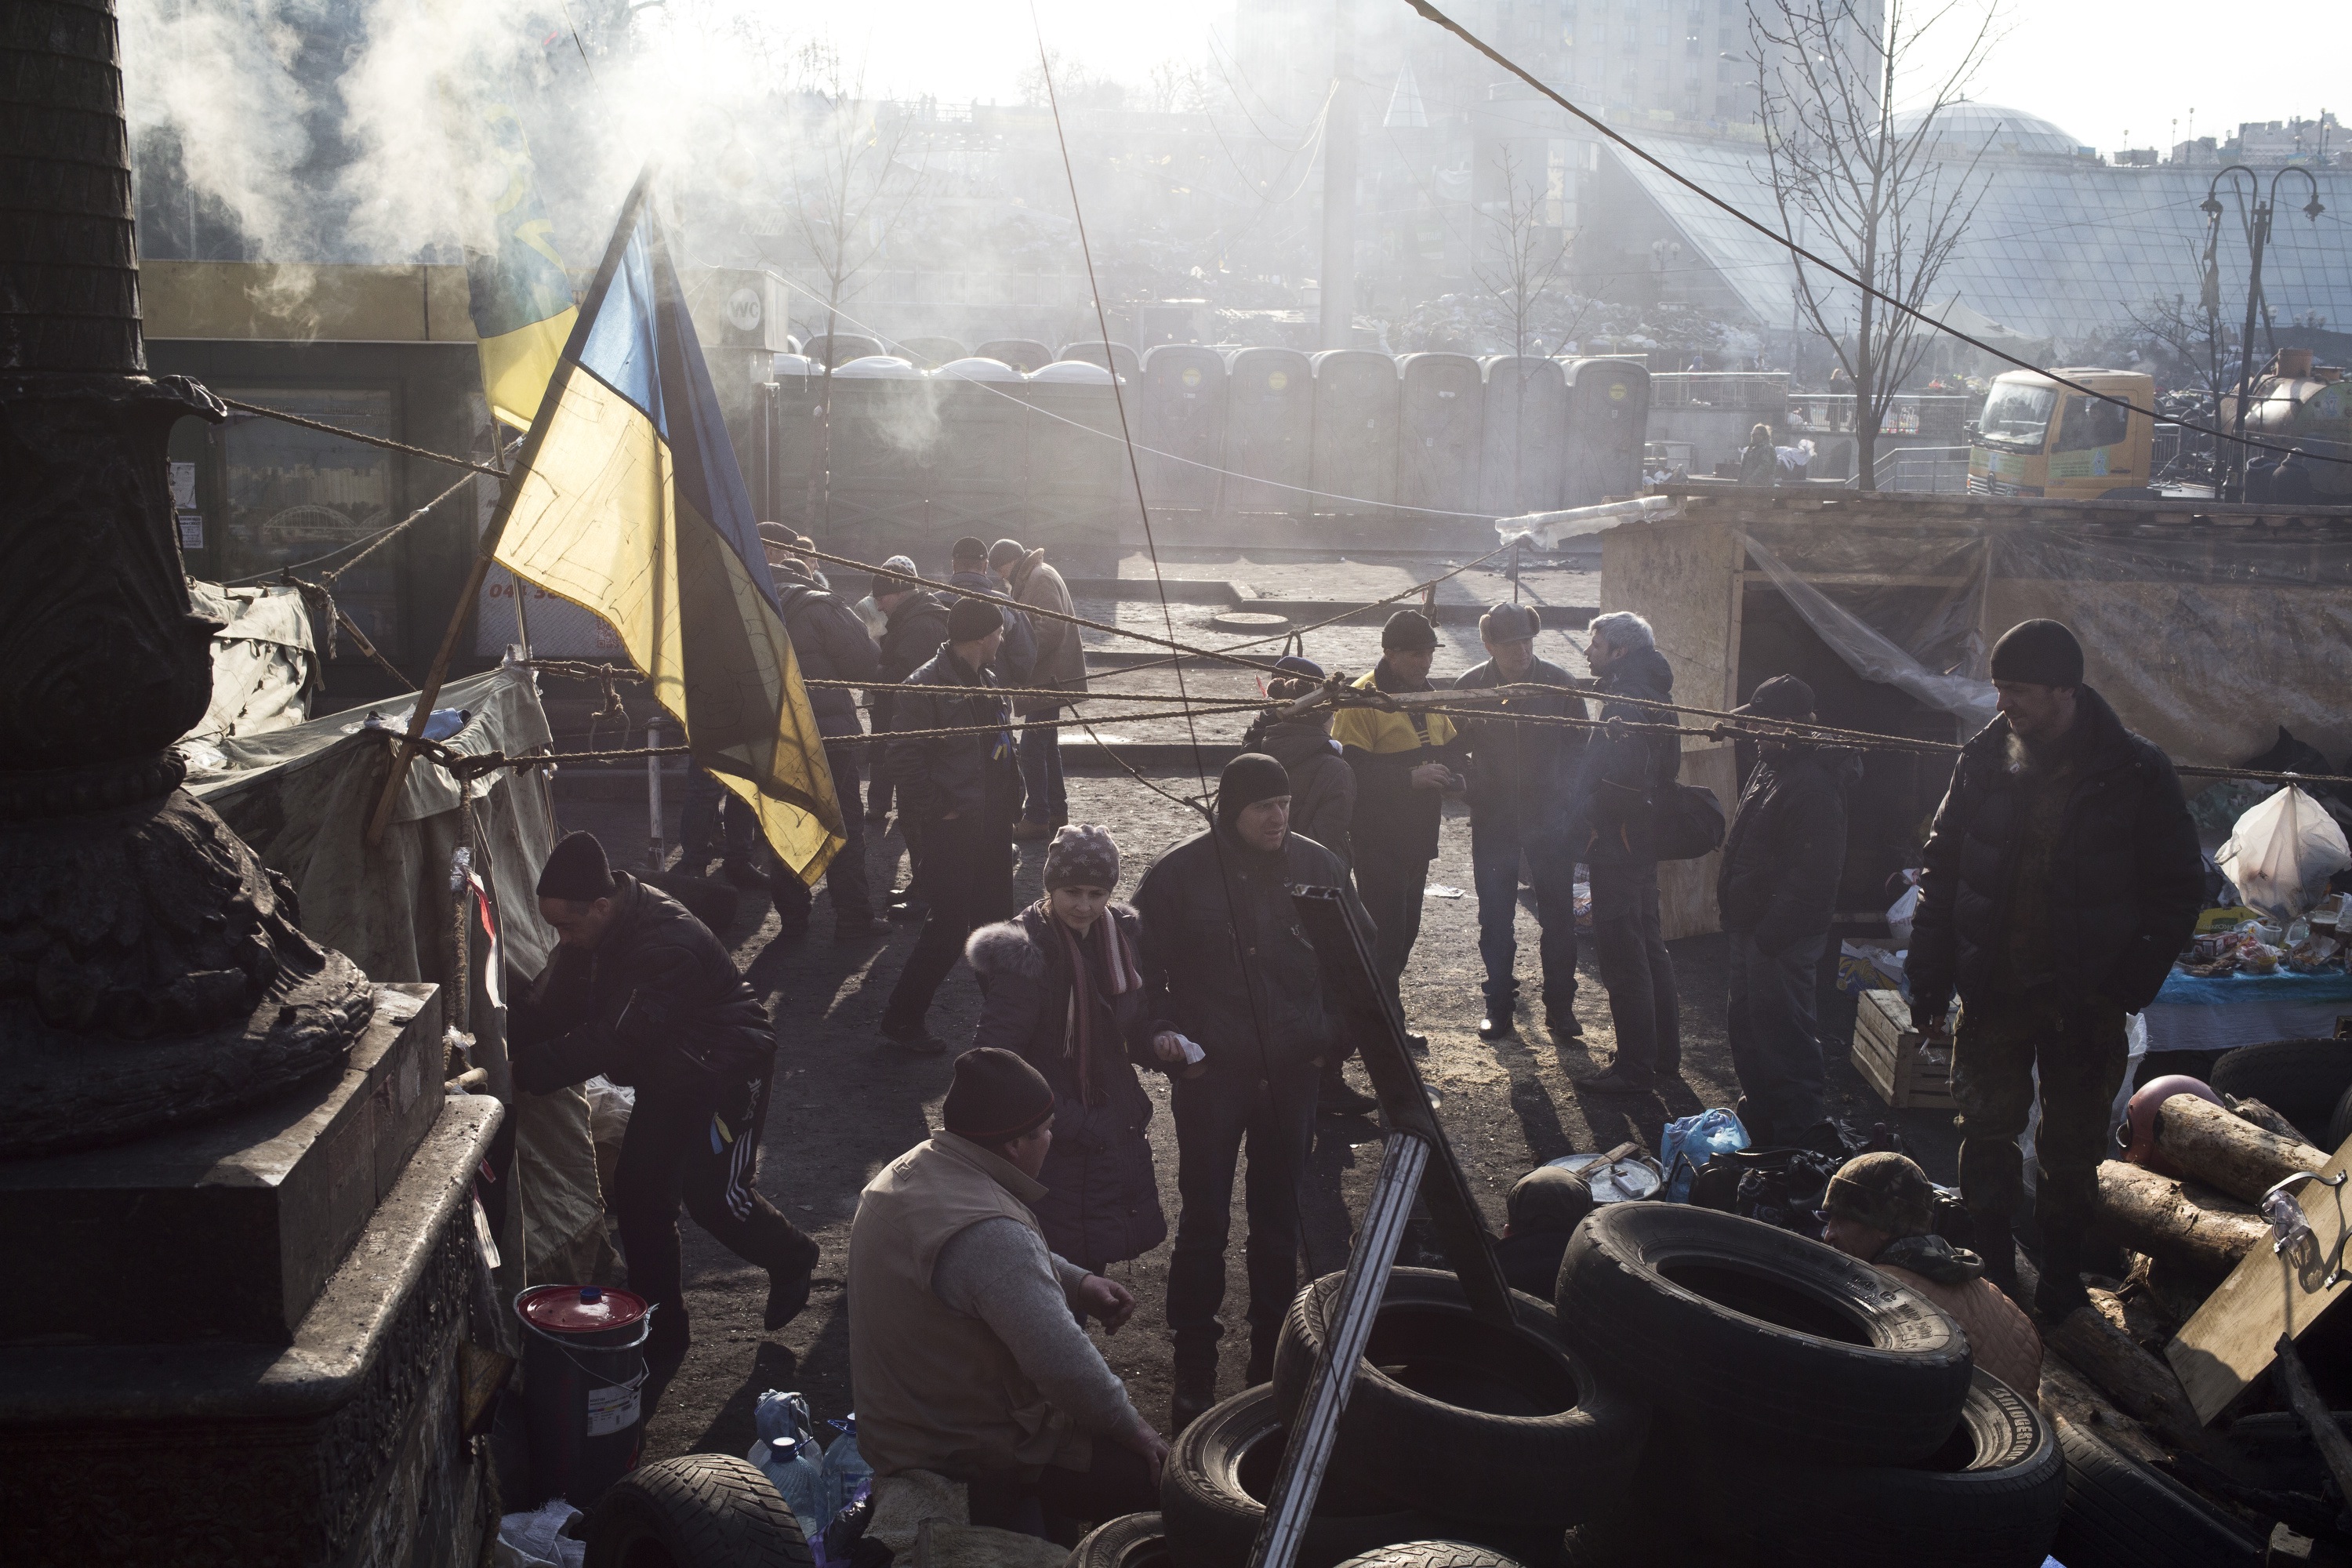 Anti-government protesters stand near barricades and tents during a sit-in of Independence Square in Kiev, Ukraine on Feb. 24, 2014. (Ed Ou/Reportage by Getty Images) 